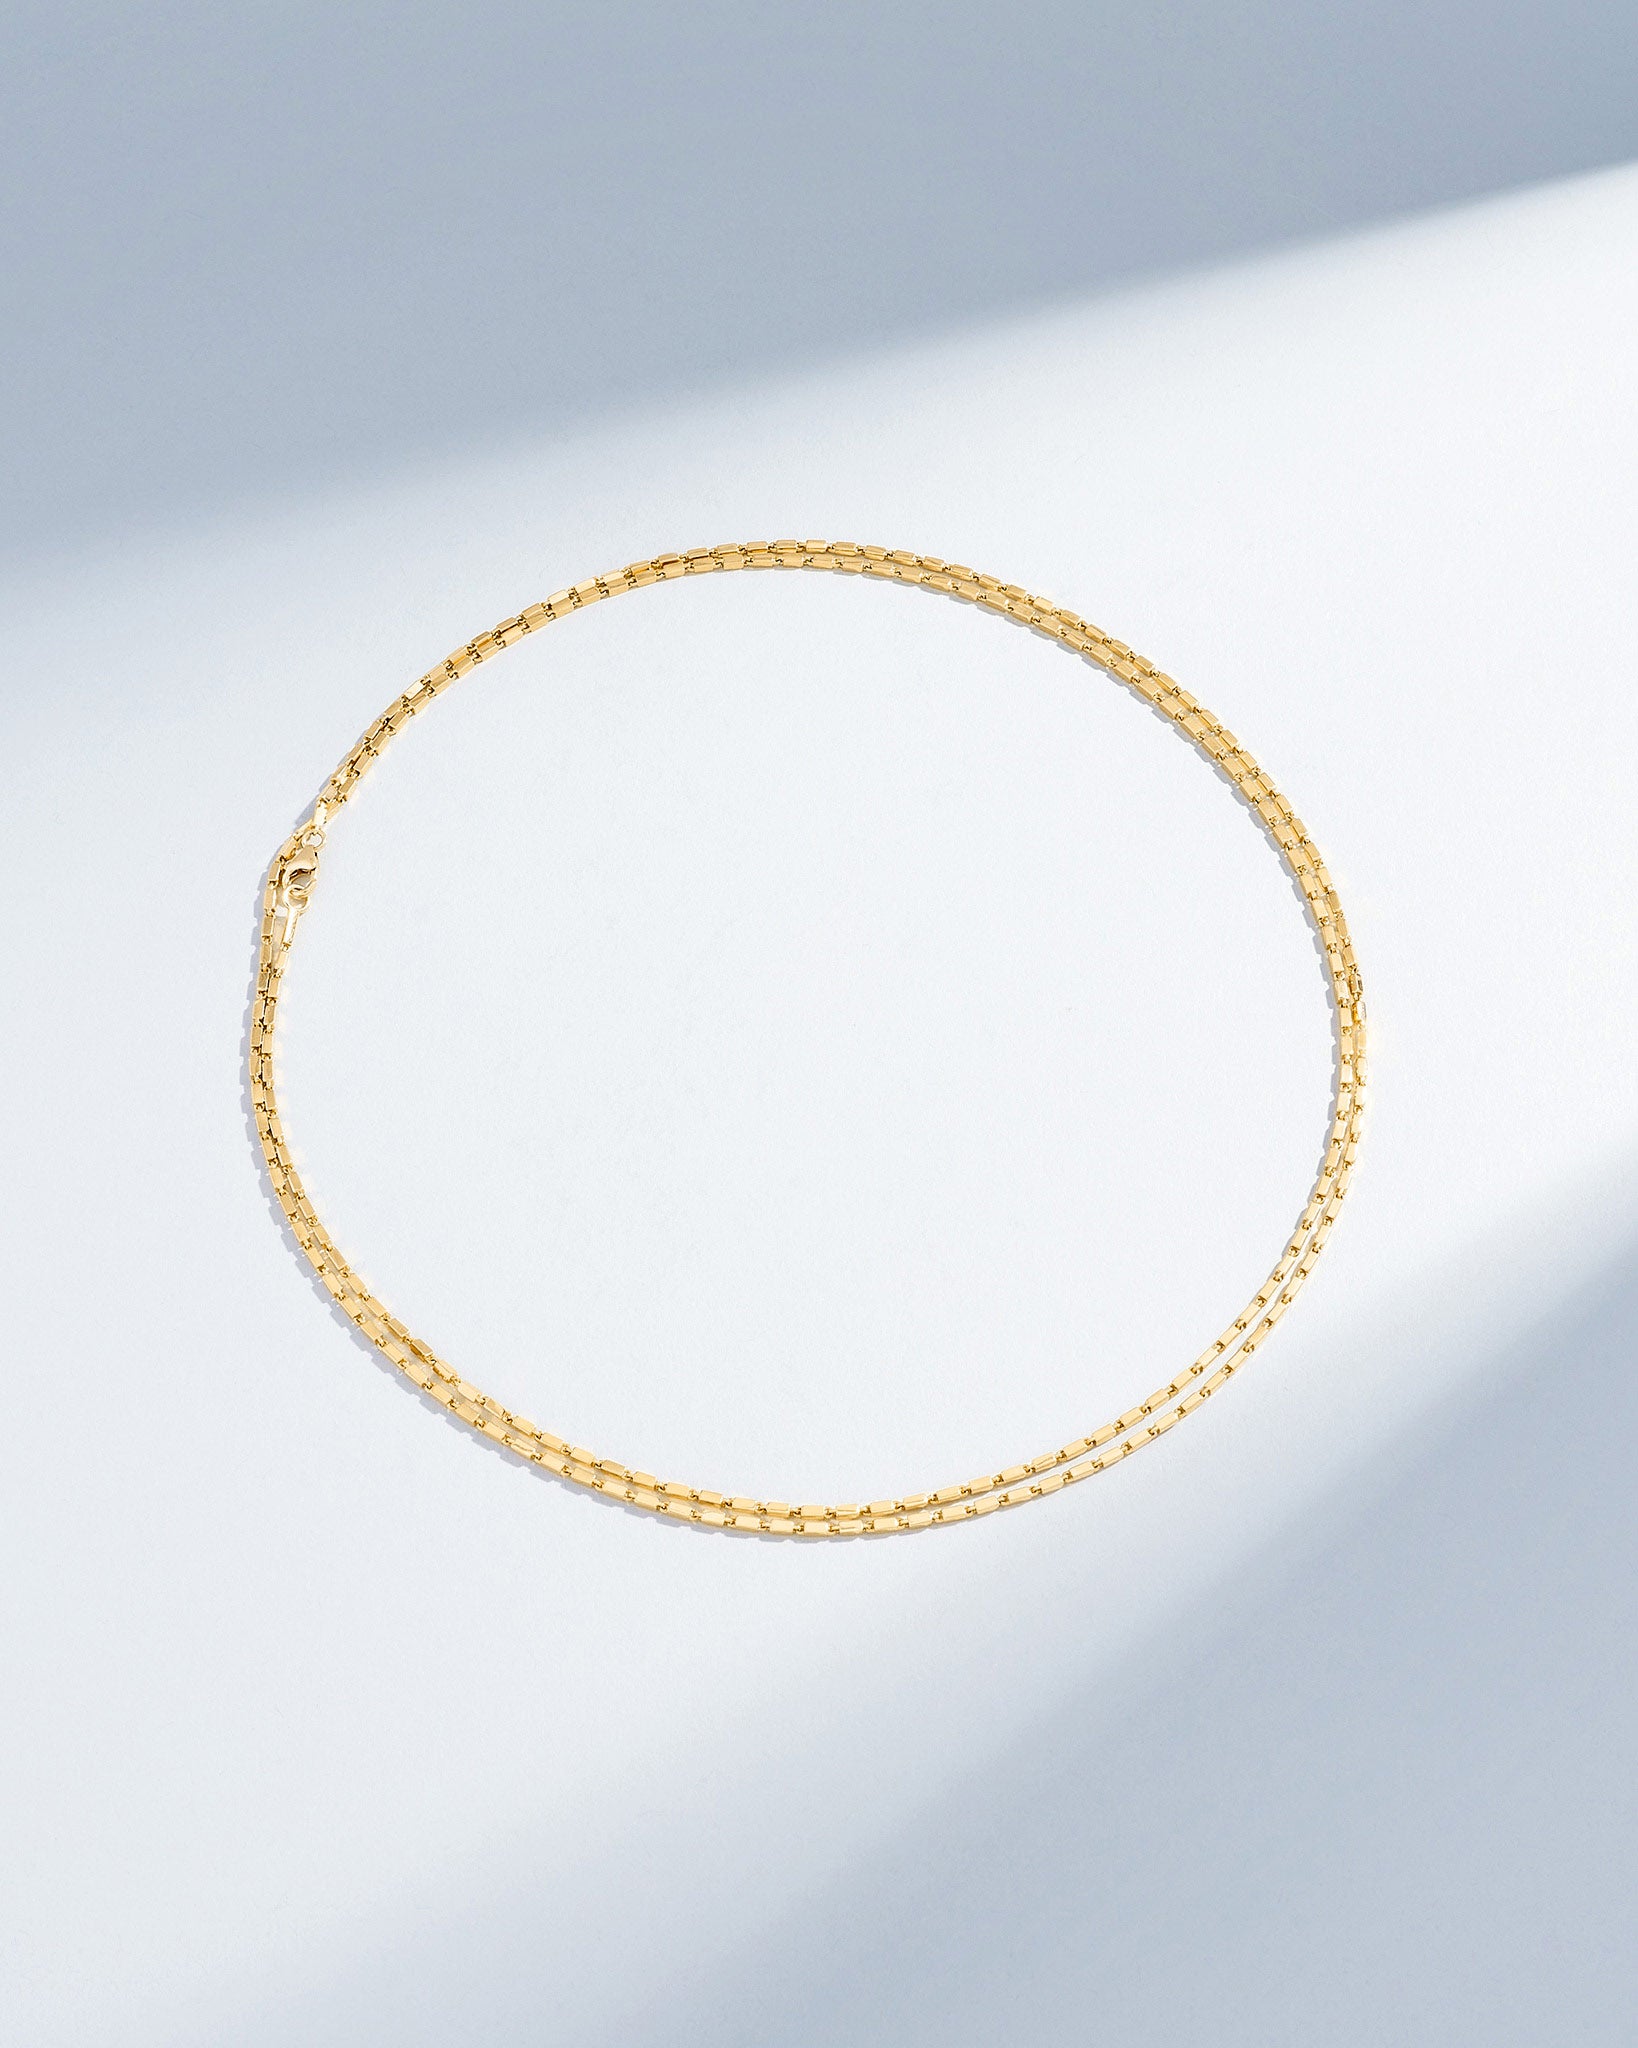 Suzanne Kalan Block-Chain Thin 36" Necklace in 18k yellow gold